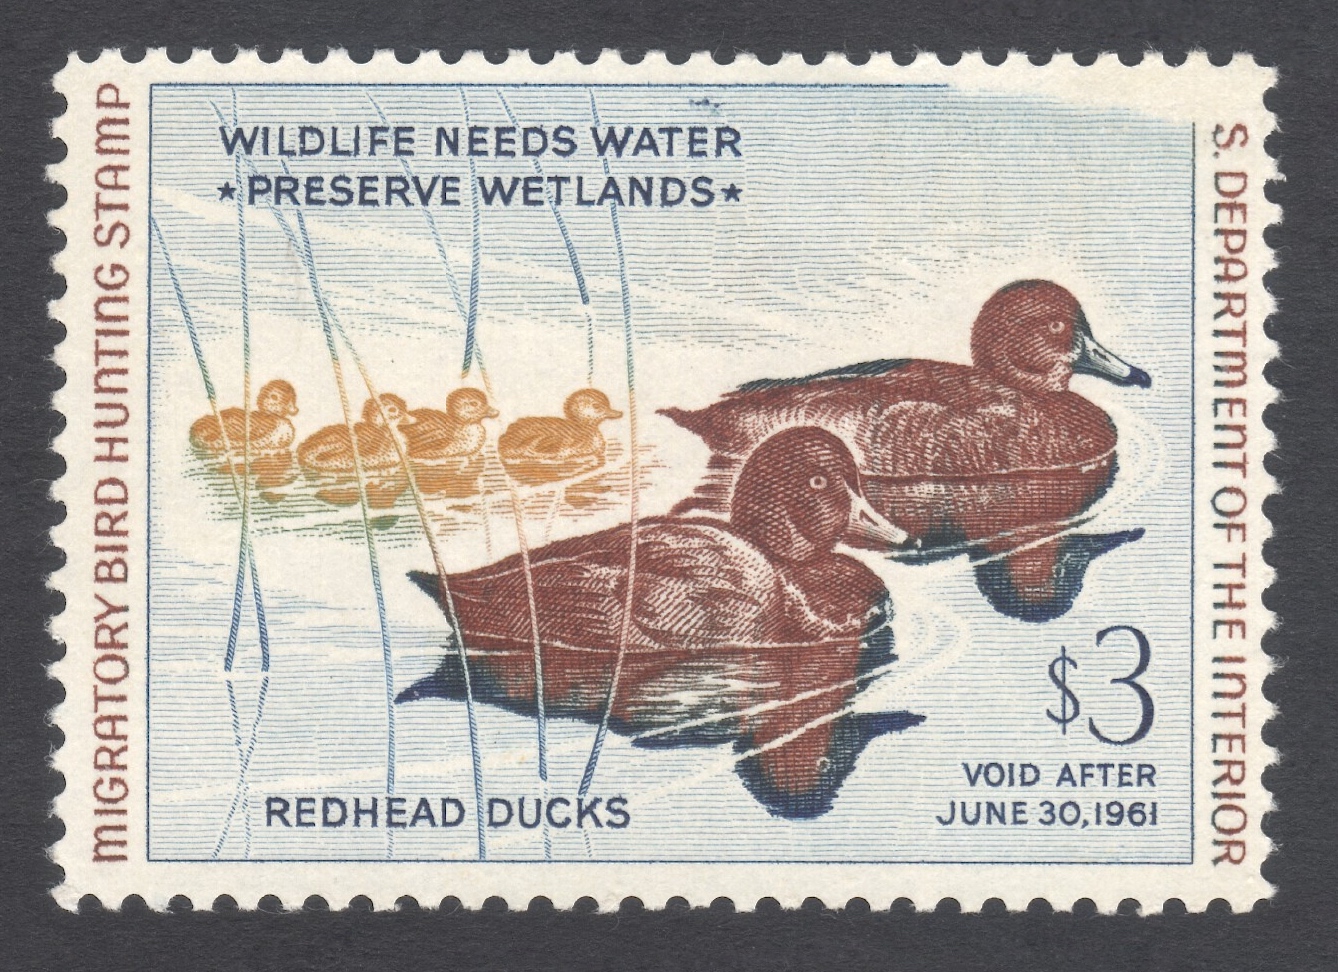 RW27 (1960-61) with Partial Ink Wipe at UR